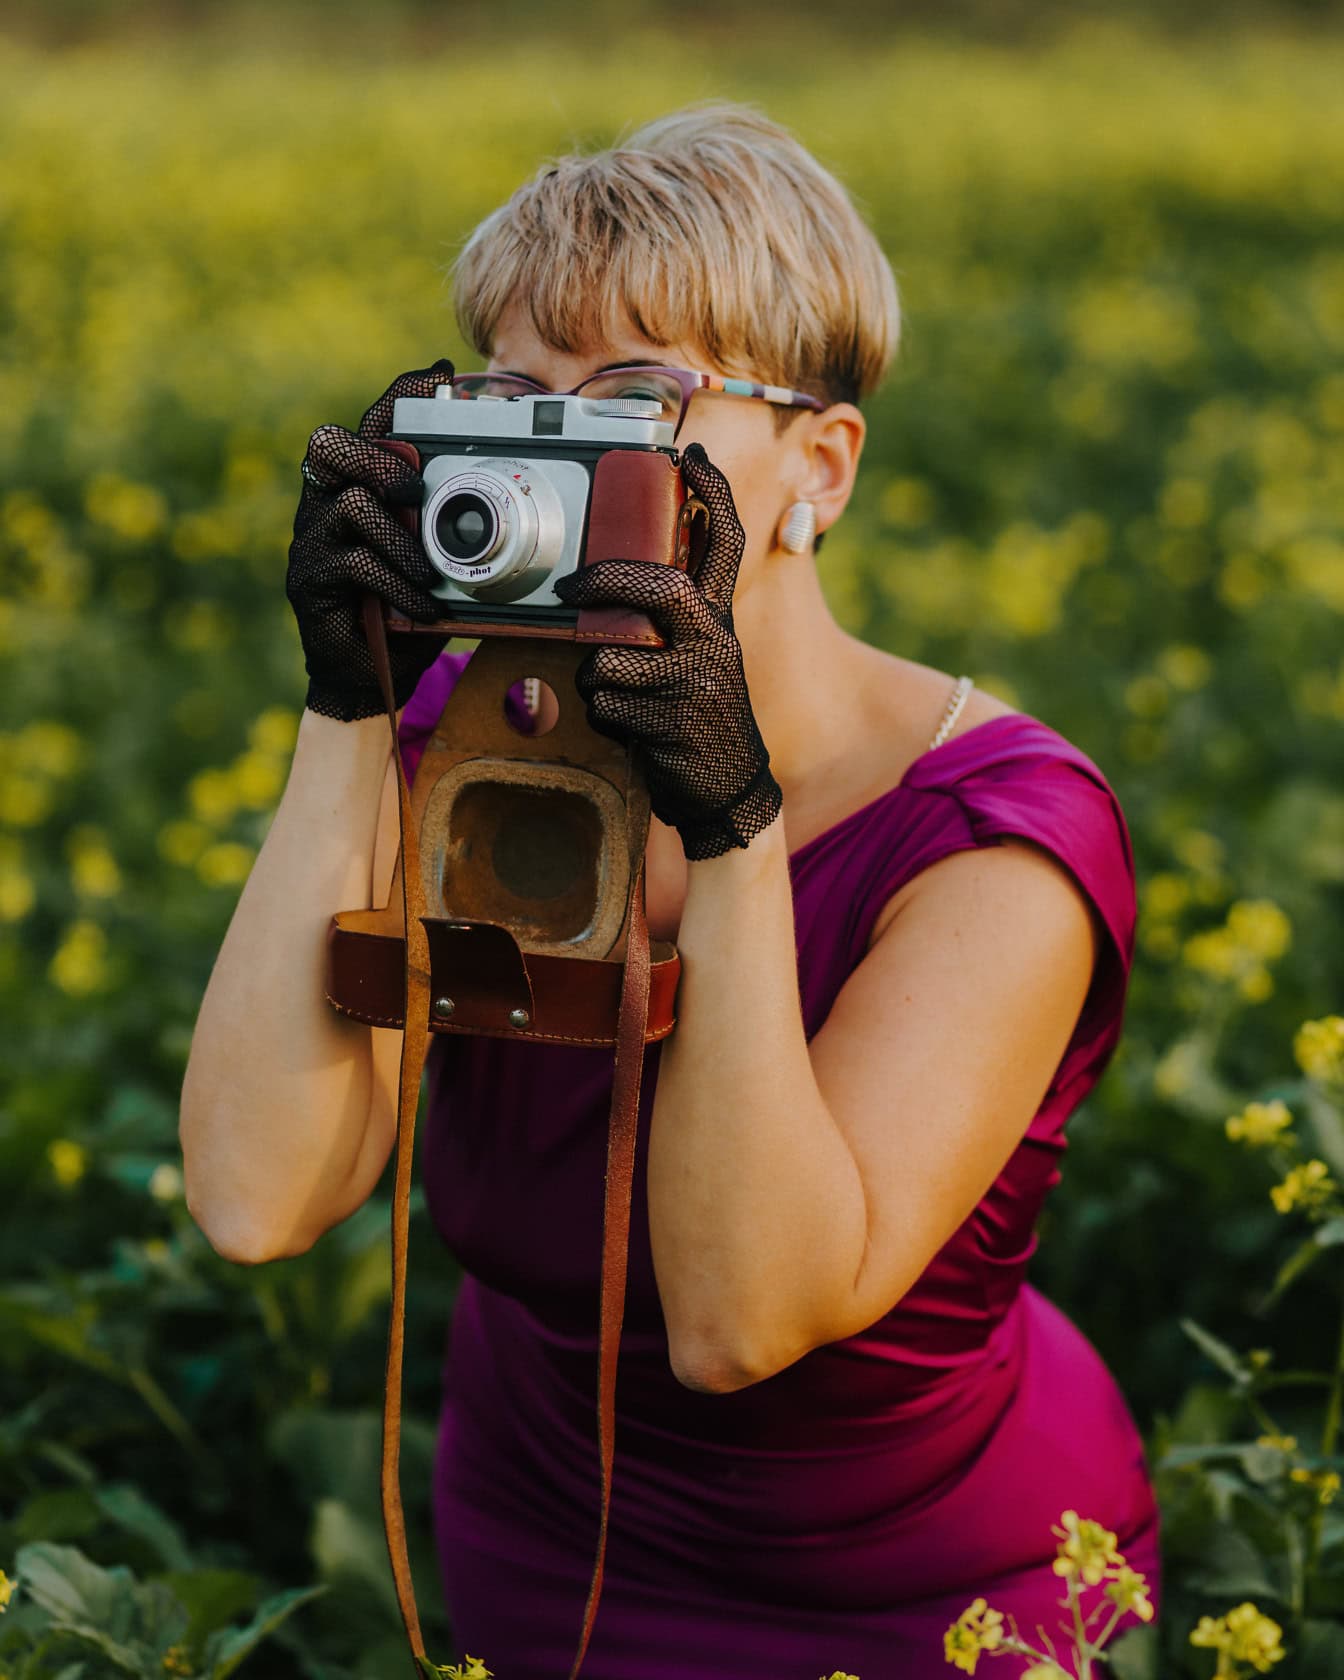 Glamorous lady photographer with short blonde hairstyle in purple dress while making photograph with an analog photo camera